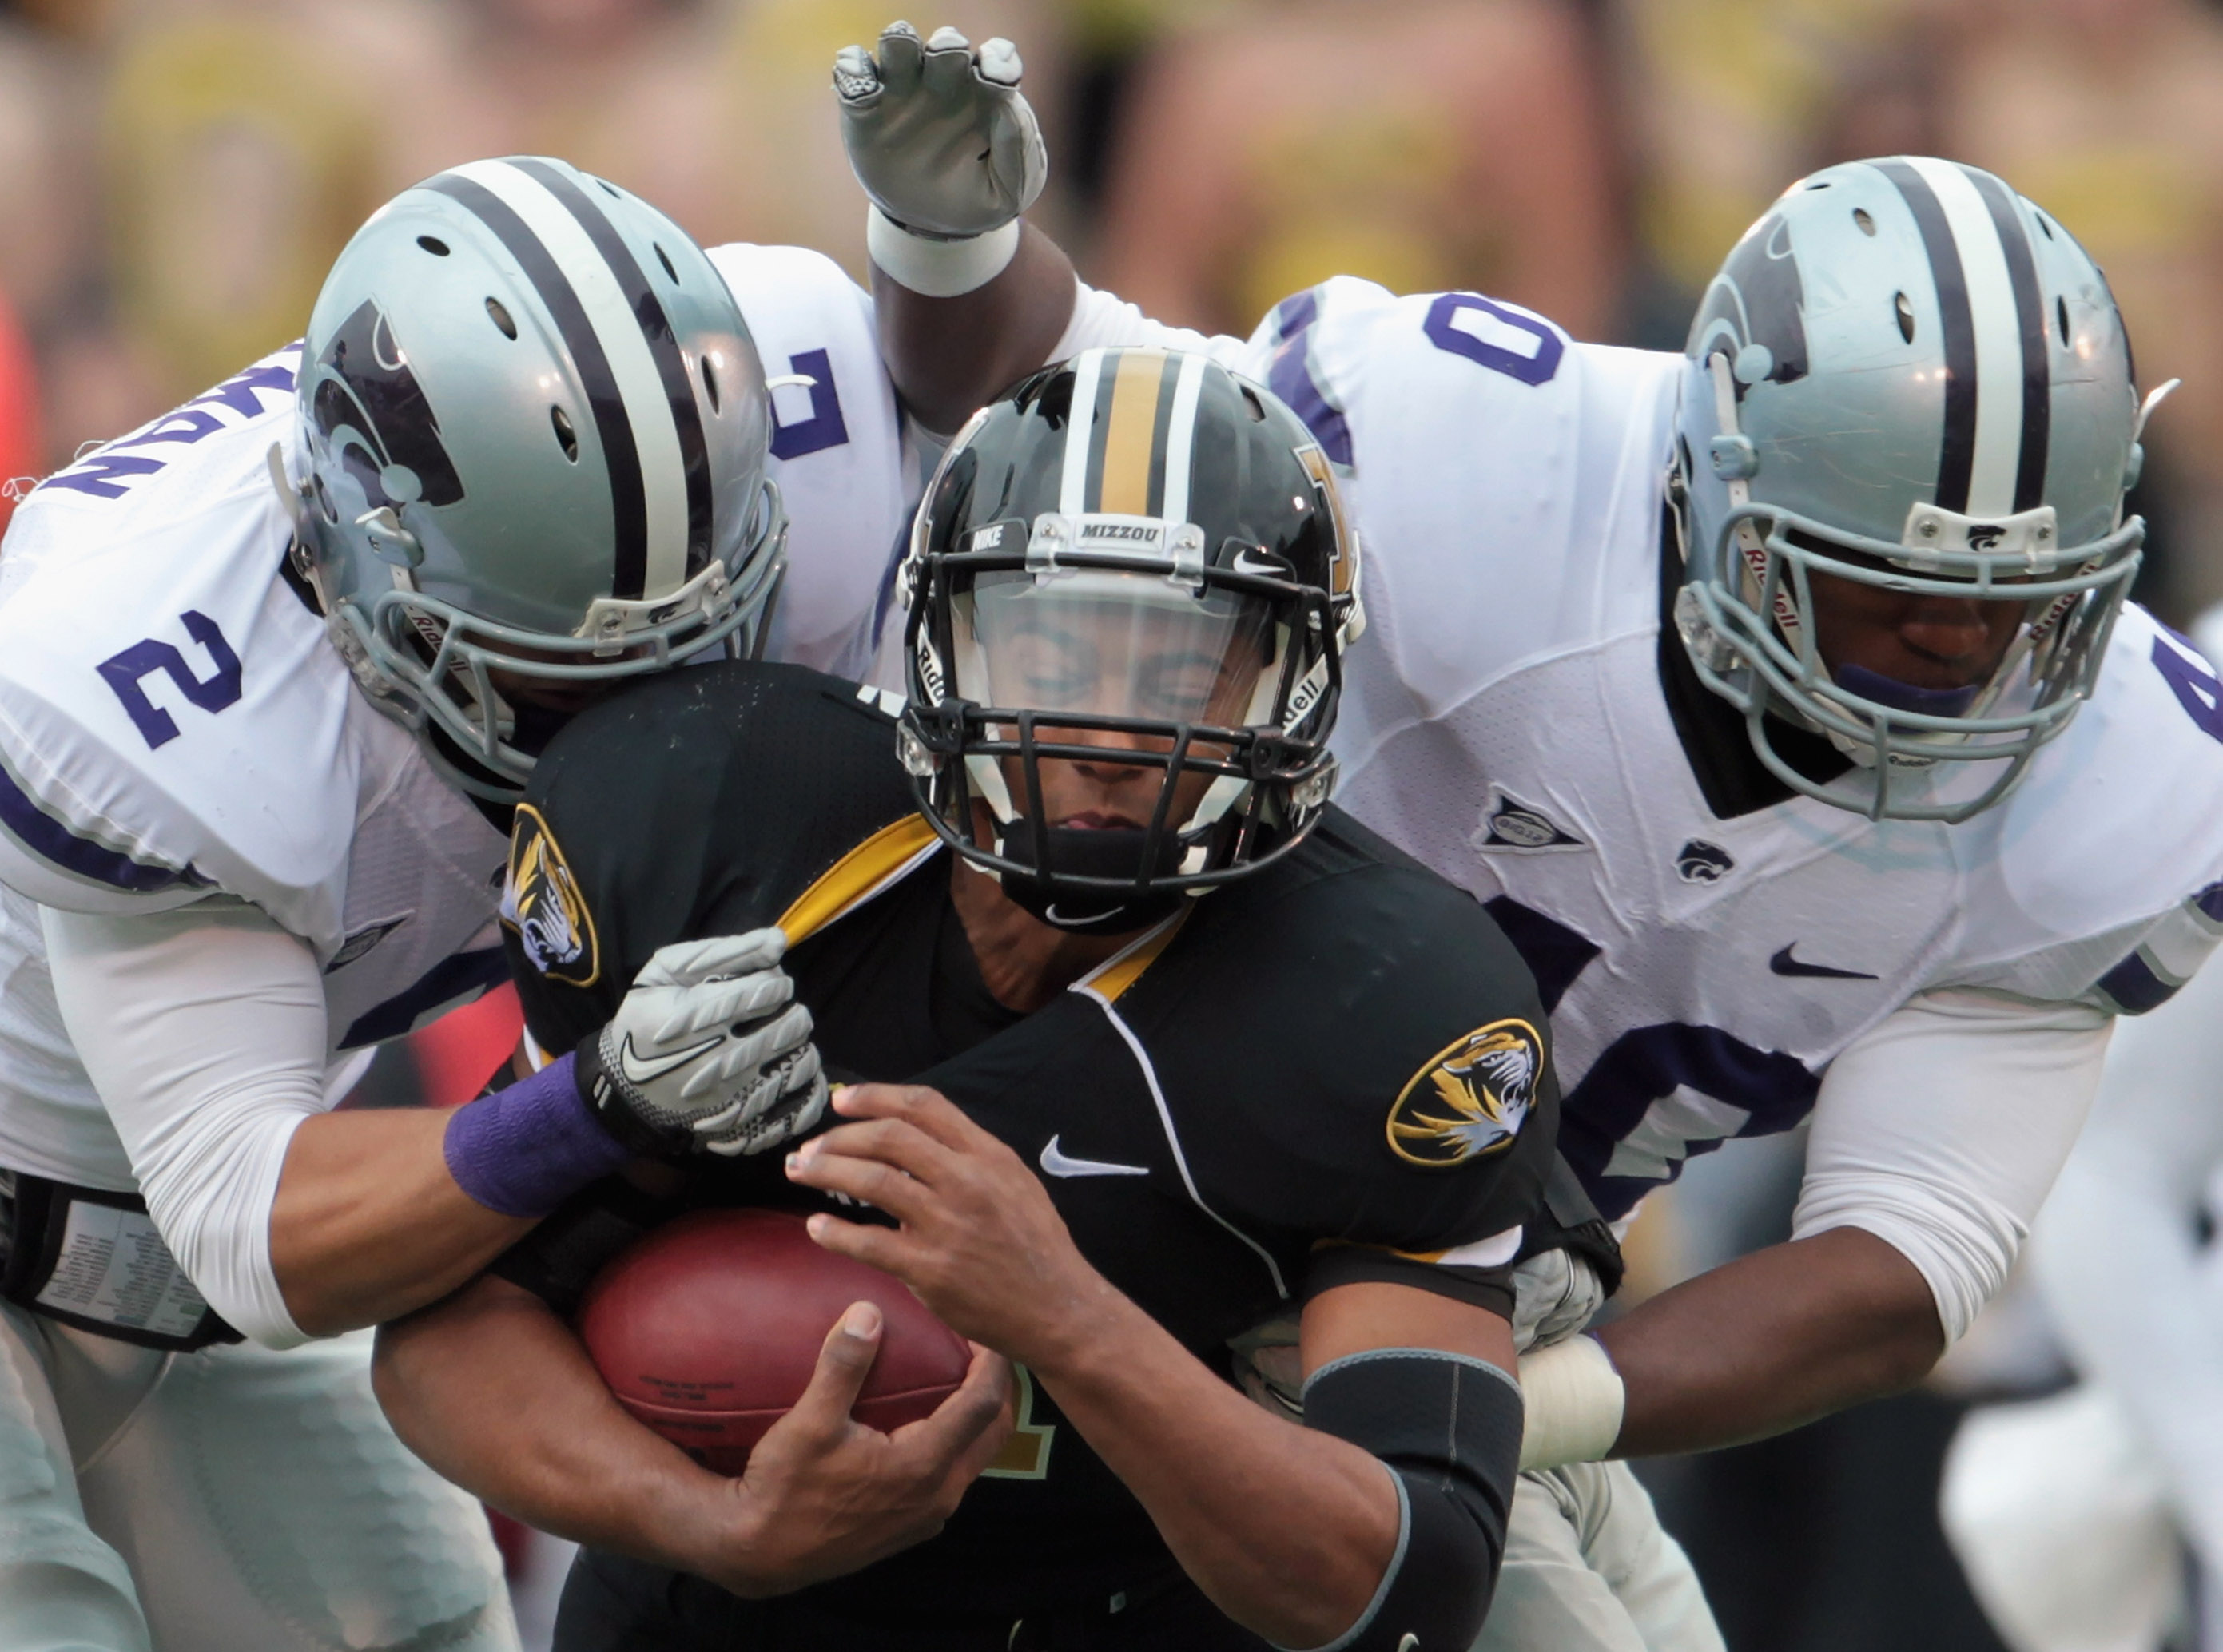 COLUMBIA, MO - NOVEMBER 13:  Quarterback James Franklin #1 of the Missouri Tigers carries the ball during the game against the Kansas State Wildcats on November 13, 2010 at Faurot Field/Memorial Stadium in Columbia, Missouri.  (Photo by Jamie Squire/Getty